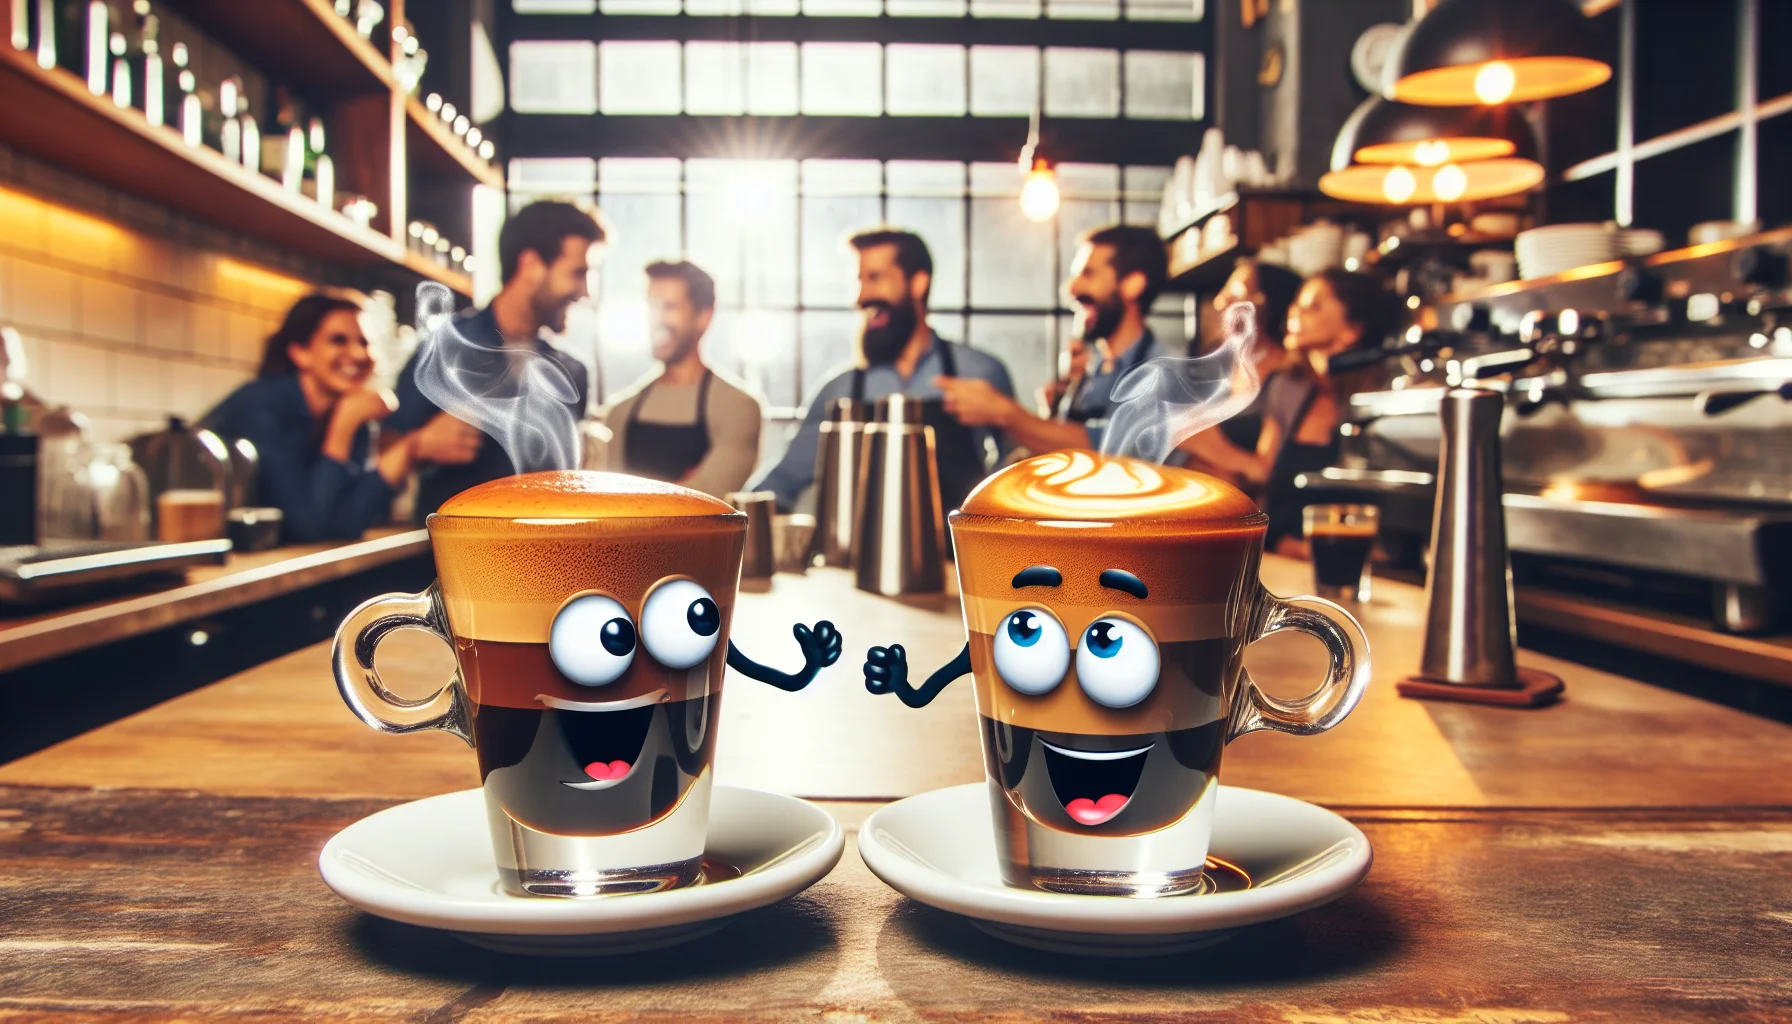 Picture an amusing scenario where two espresso shot glasses have been anthropomorphized. They have expressive faces and are engaging in a playful comedy skit on a cafe counter. The first shot glass is brimming with fresh, steaming espresso, appearing all heated and flustered, while the second one is empty and nudging the first one, looking all cool and teasing. The background includes barista equipment, cozy ambiance, and coffee-loving customers of mixed gender and varied descents including Caucasian, Hispanic, and Black, laughing and enjoying the amusing espresso show.